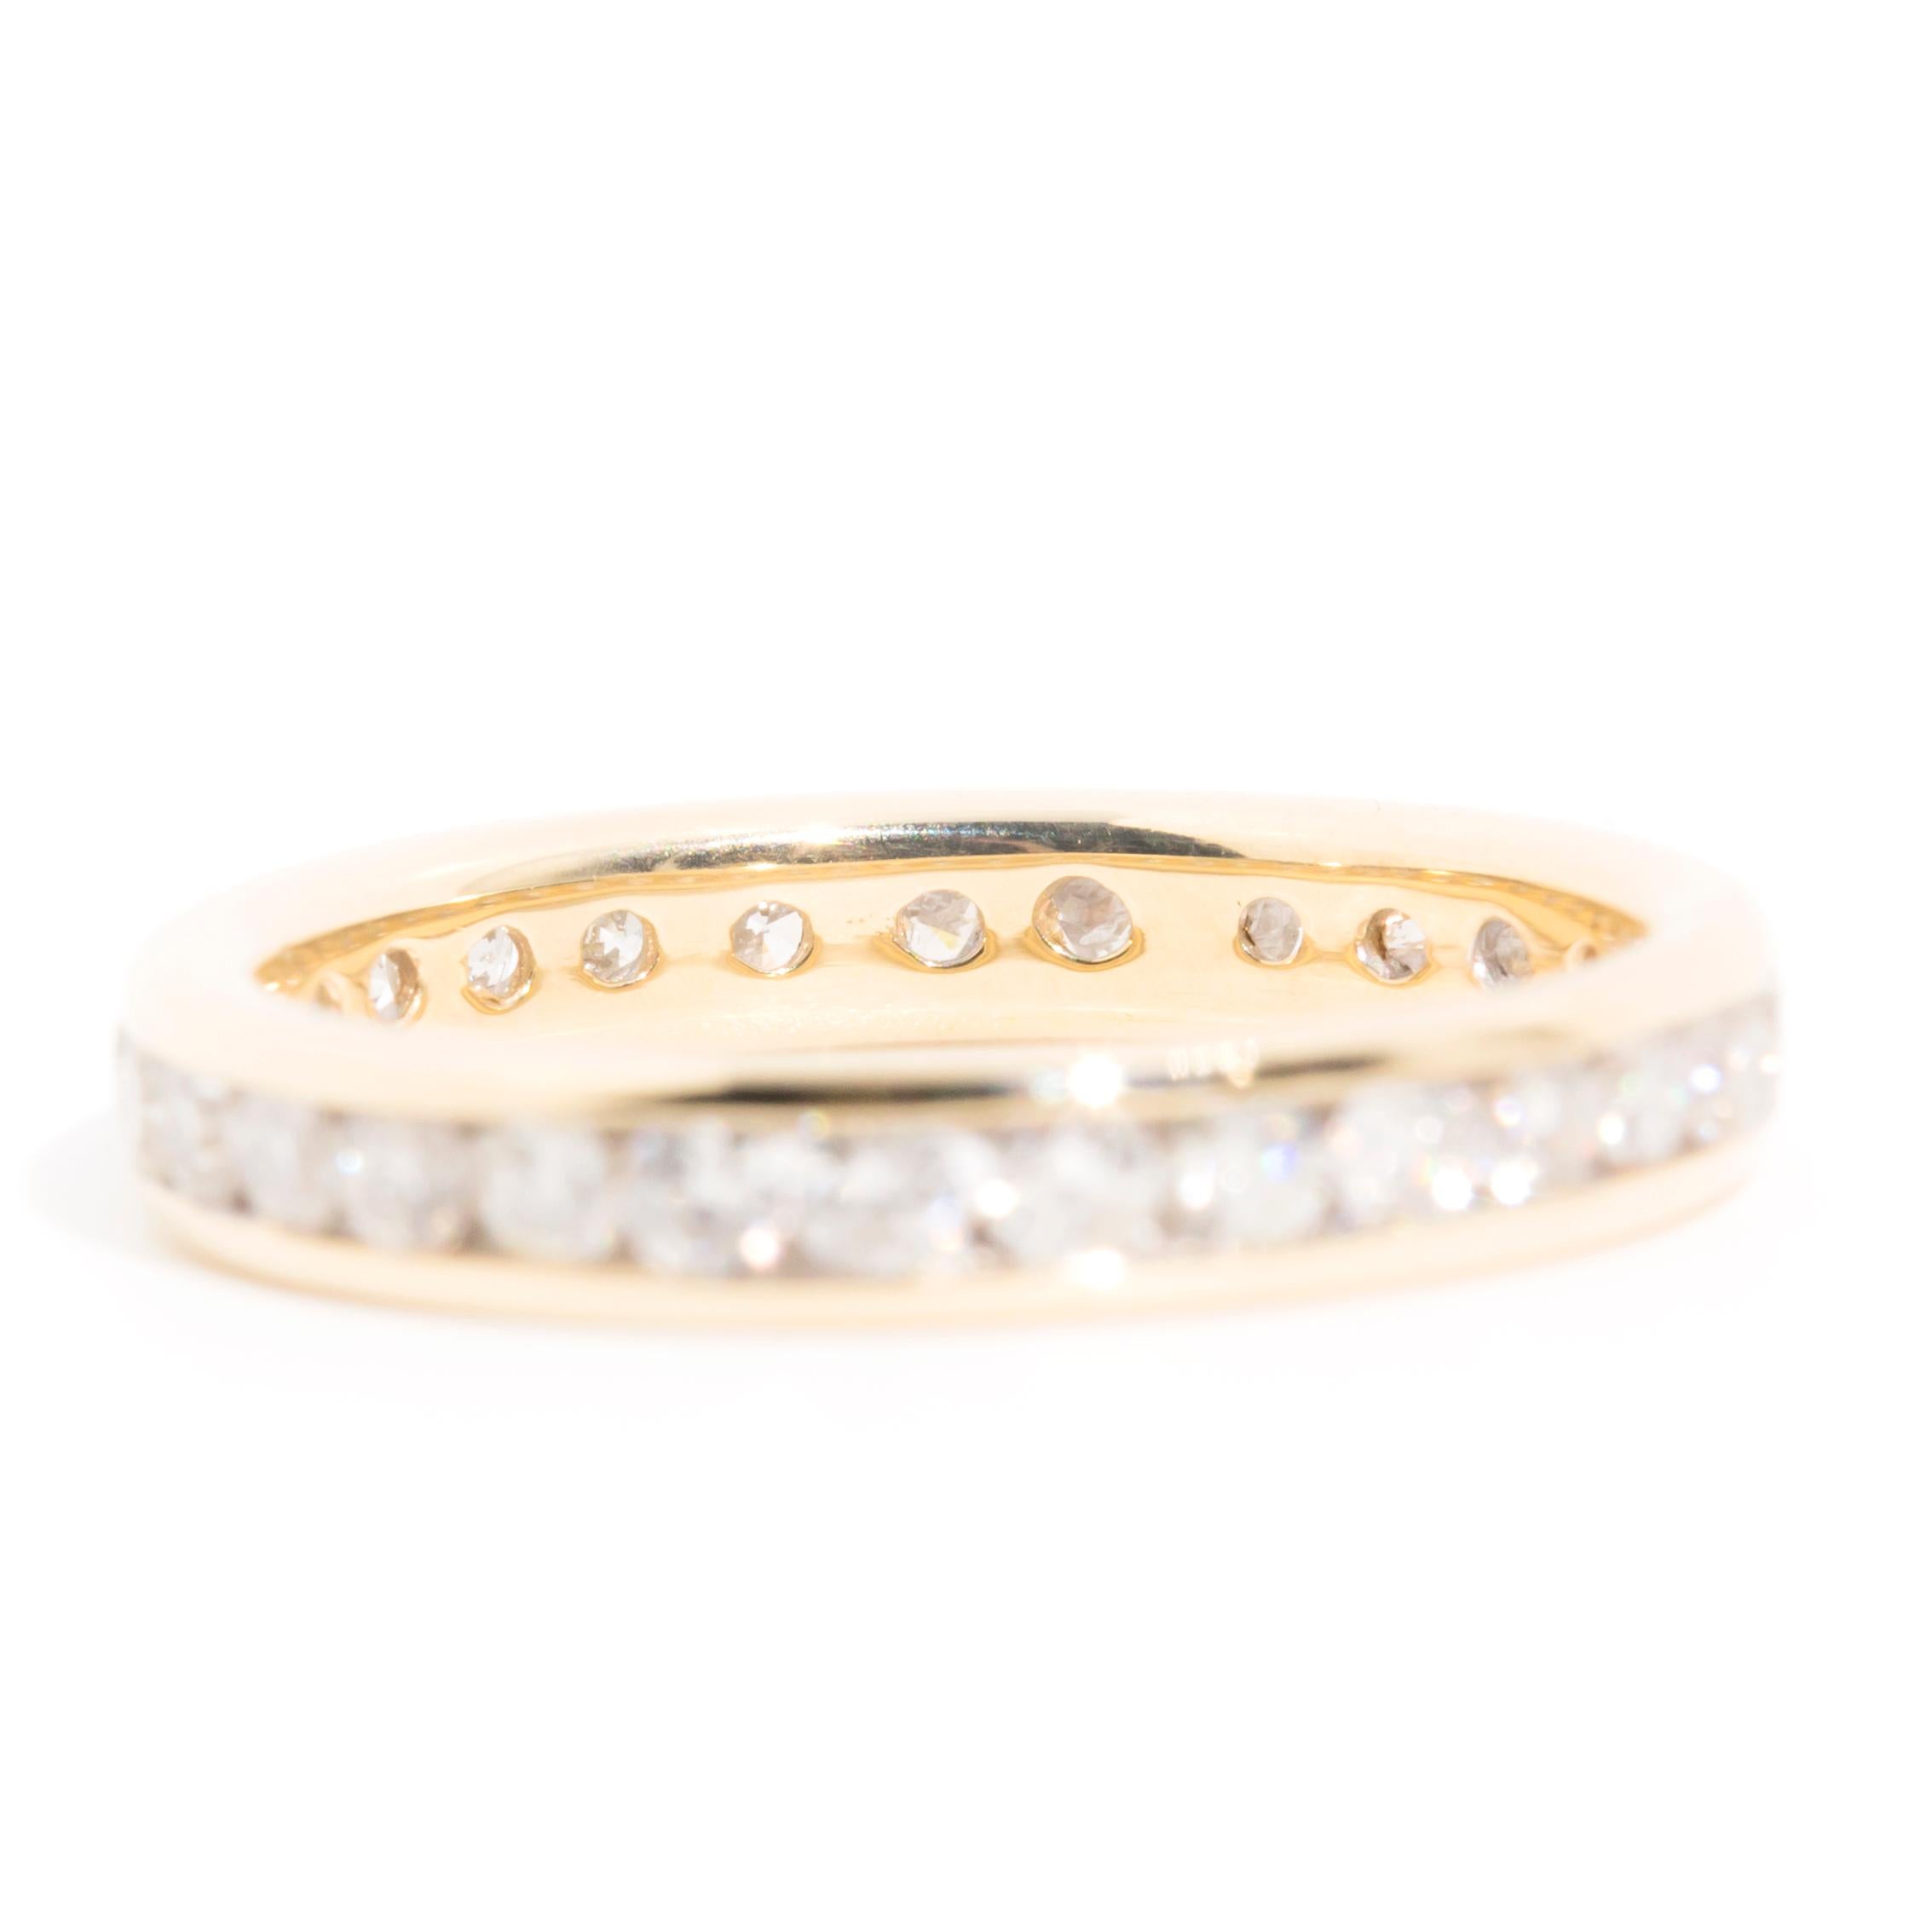 Infinity Round Diamond Vintage Eternity Band Ring in 9 Carat Yellow Gold 1